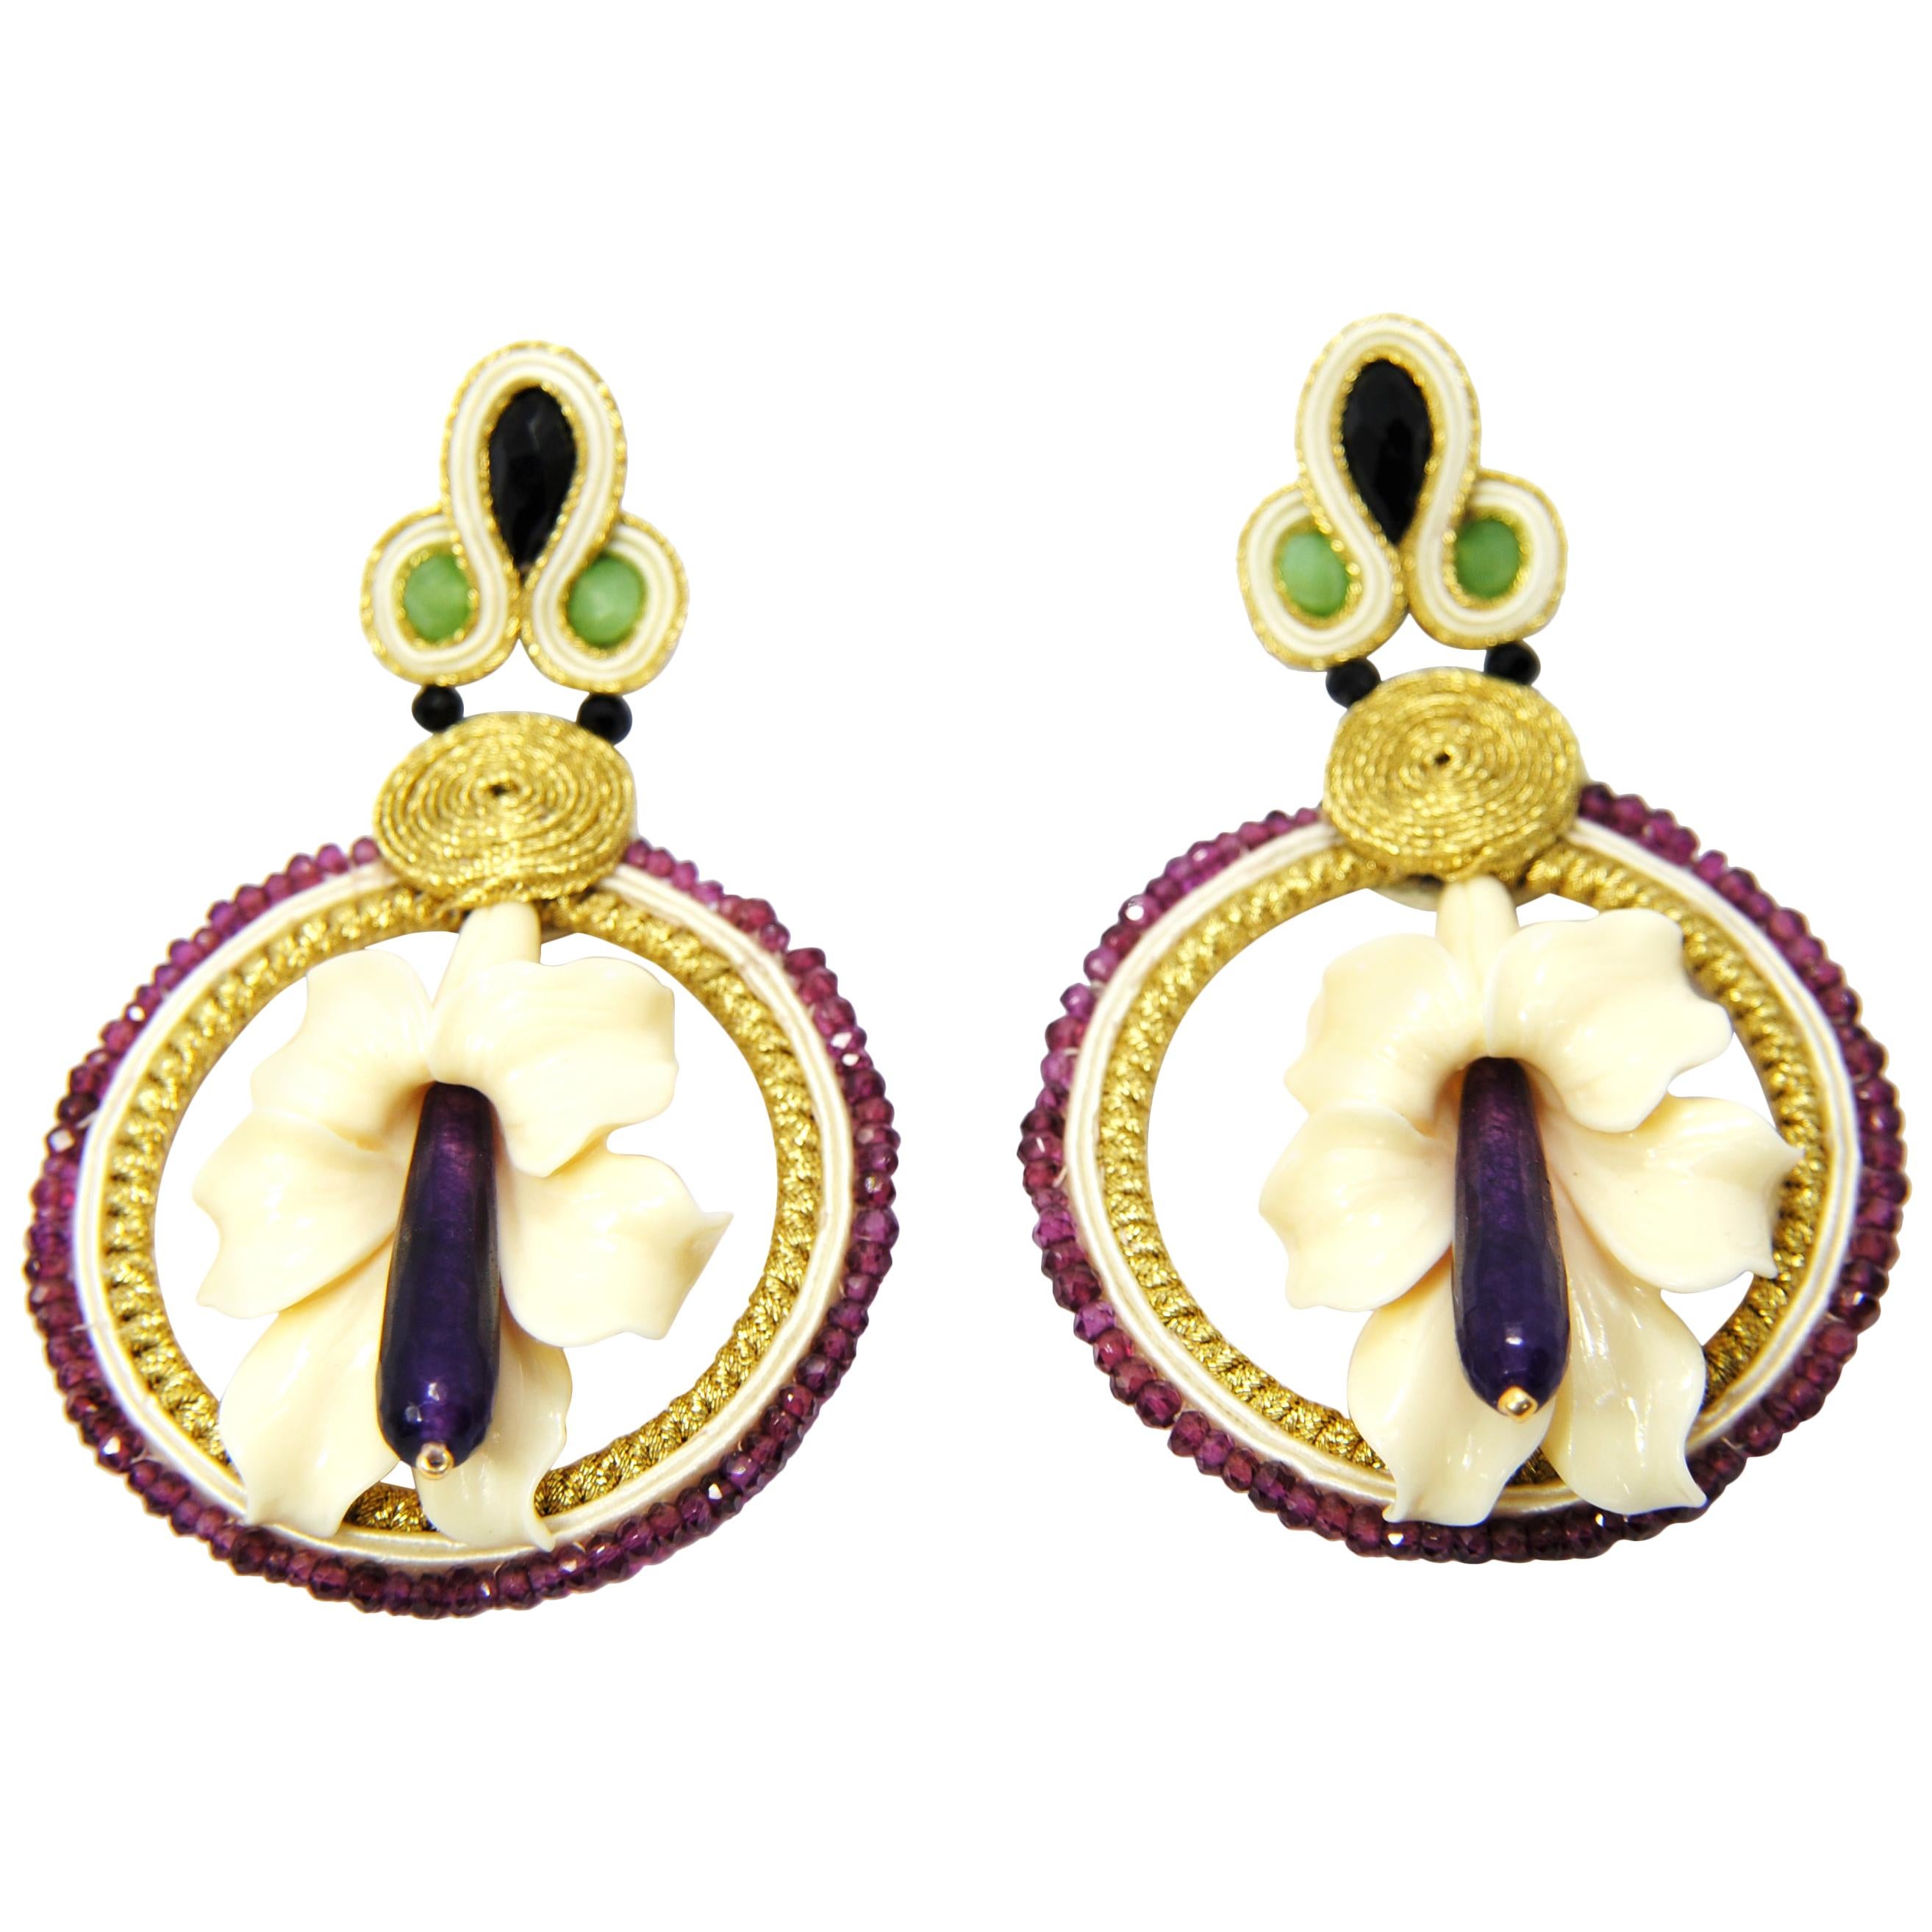 Pradera Kalas Collection Soutache Silver Earrings with Amathysts and Purple Jade